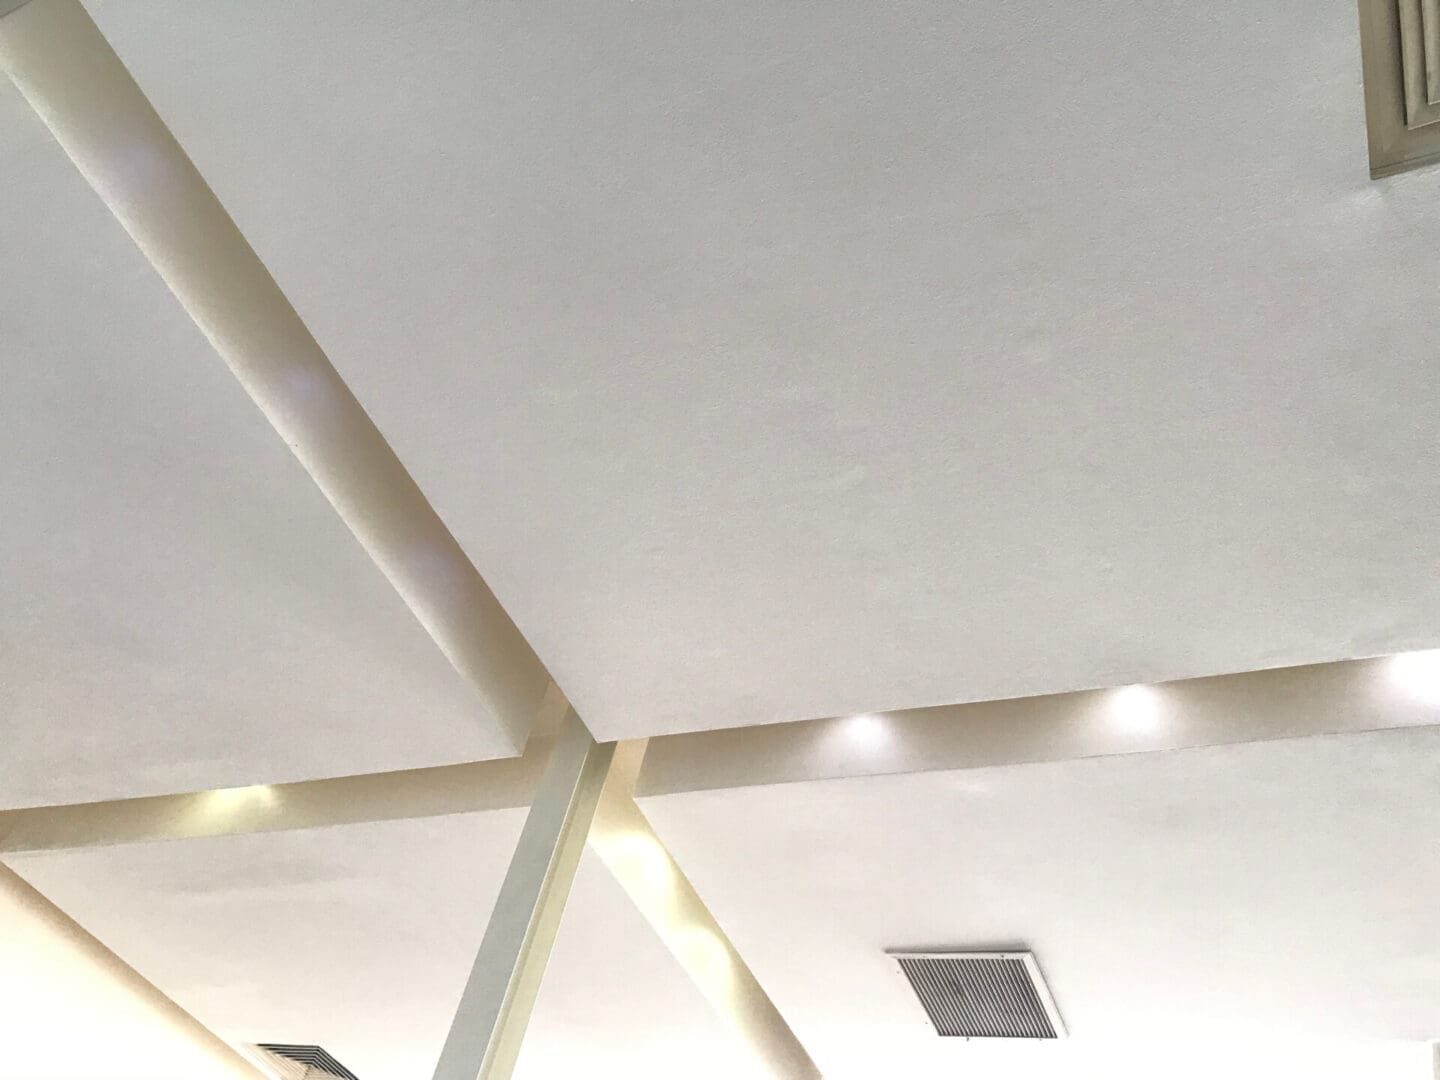 A ceiling with lights and a white wall